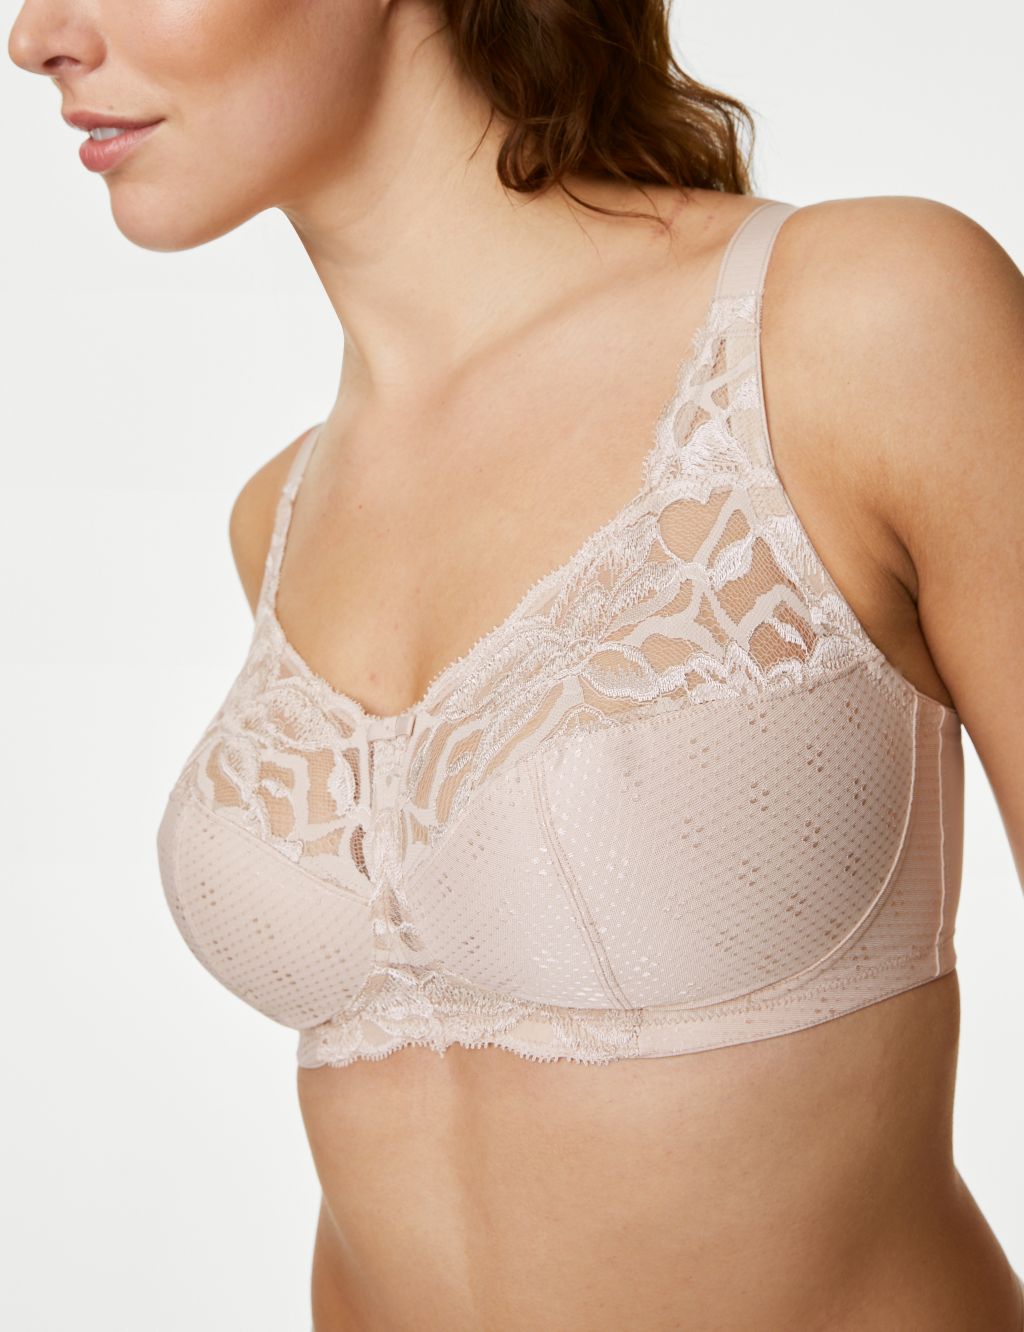 Total Support Wildblooms Non-Wired Bra B-H image 3